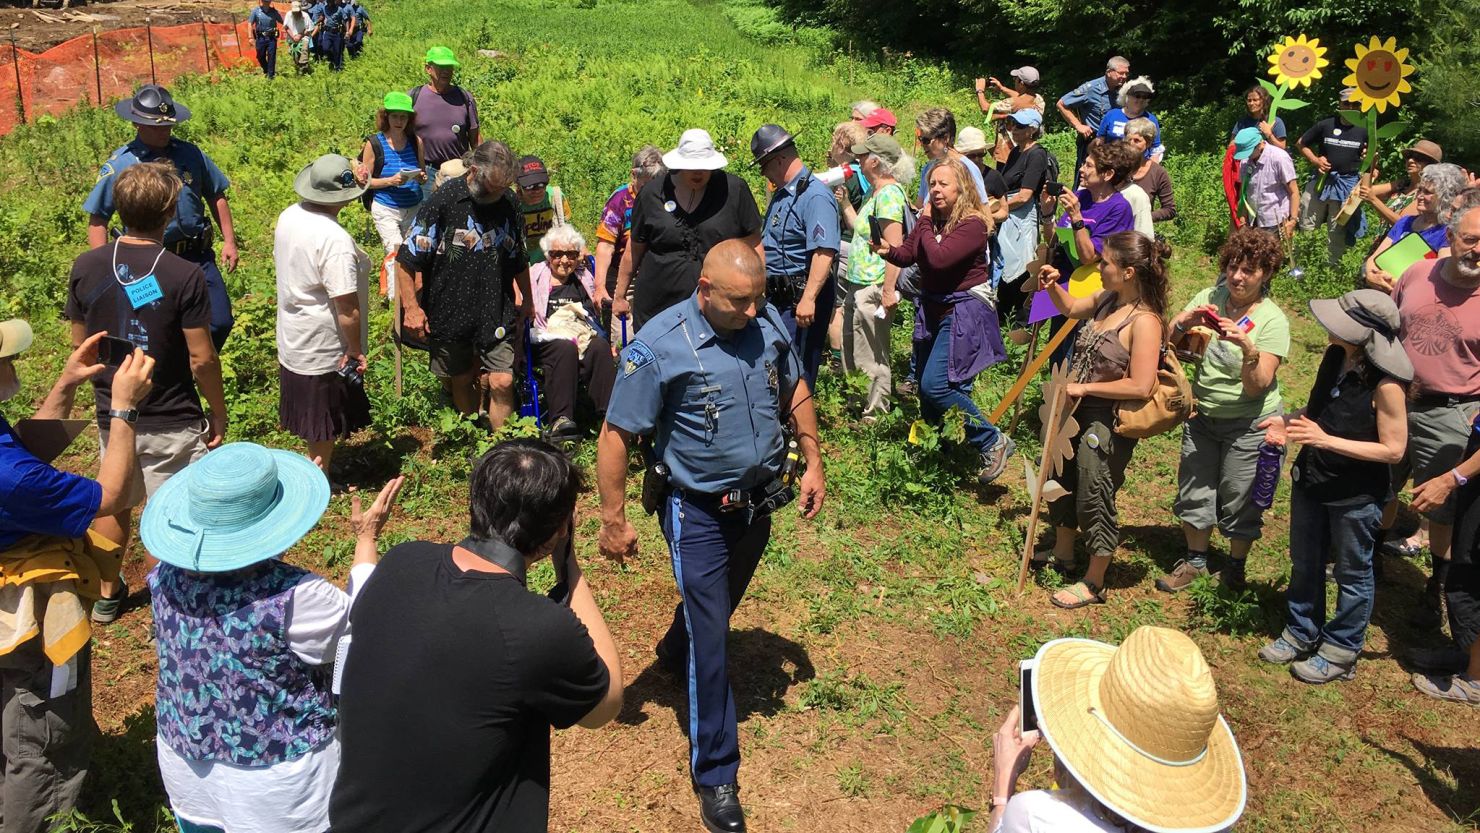 A Massachusetts State Police officer arrests longtime peace activist Frances Crowe and eight others.